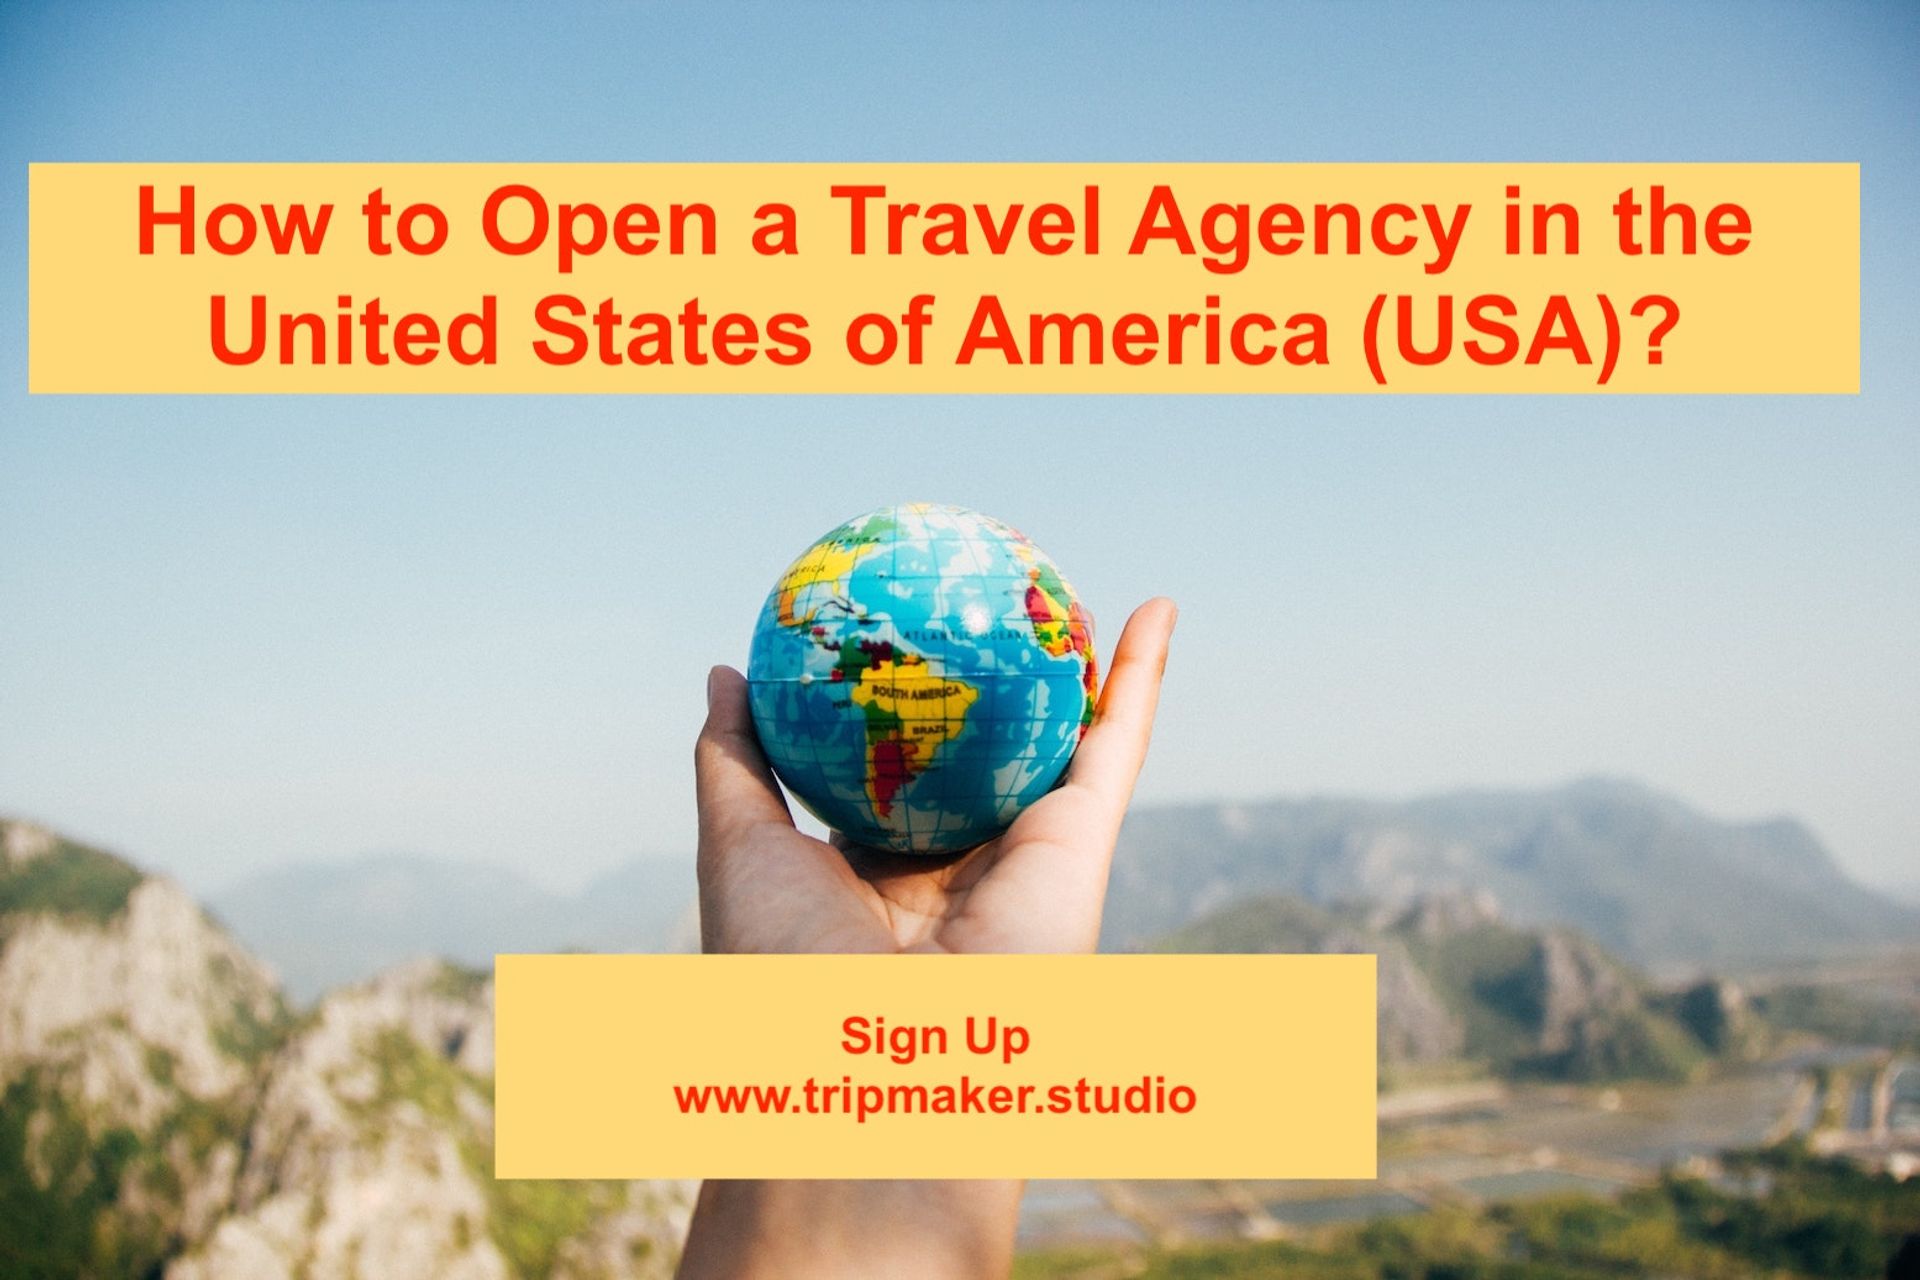 How to Open a Travel Agency in the United States of America (USA)